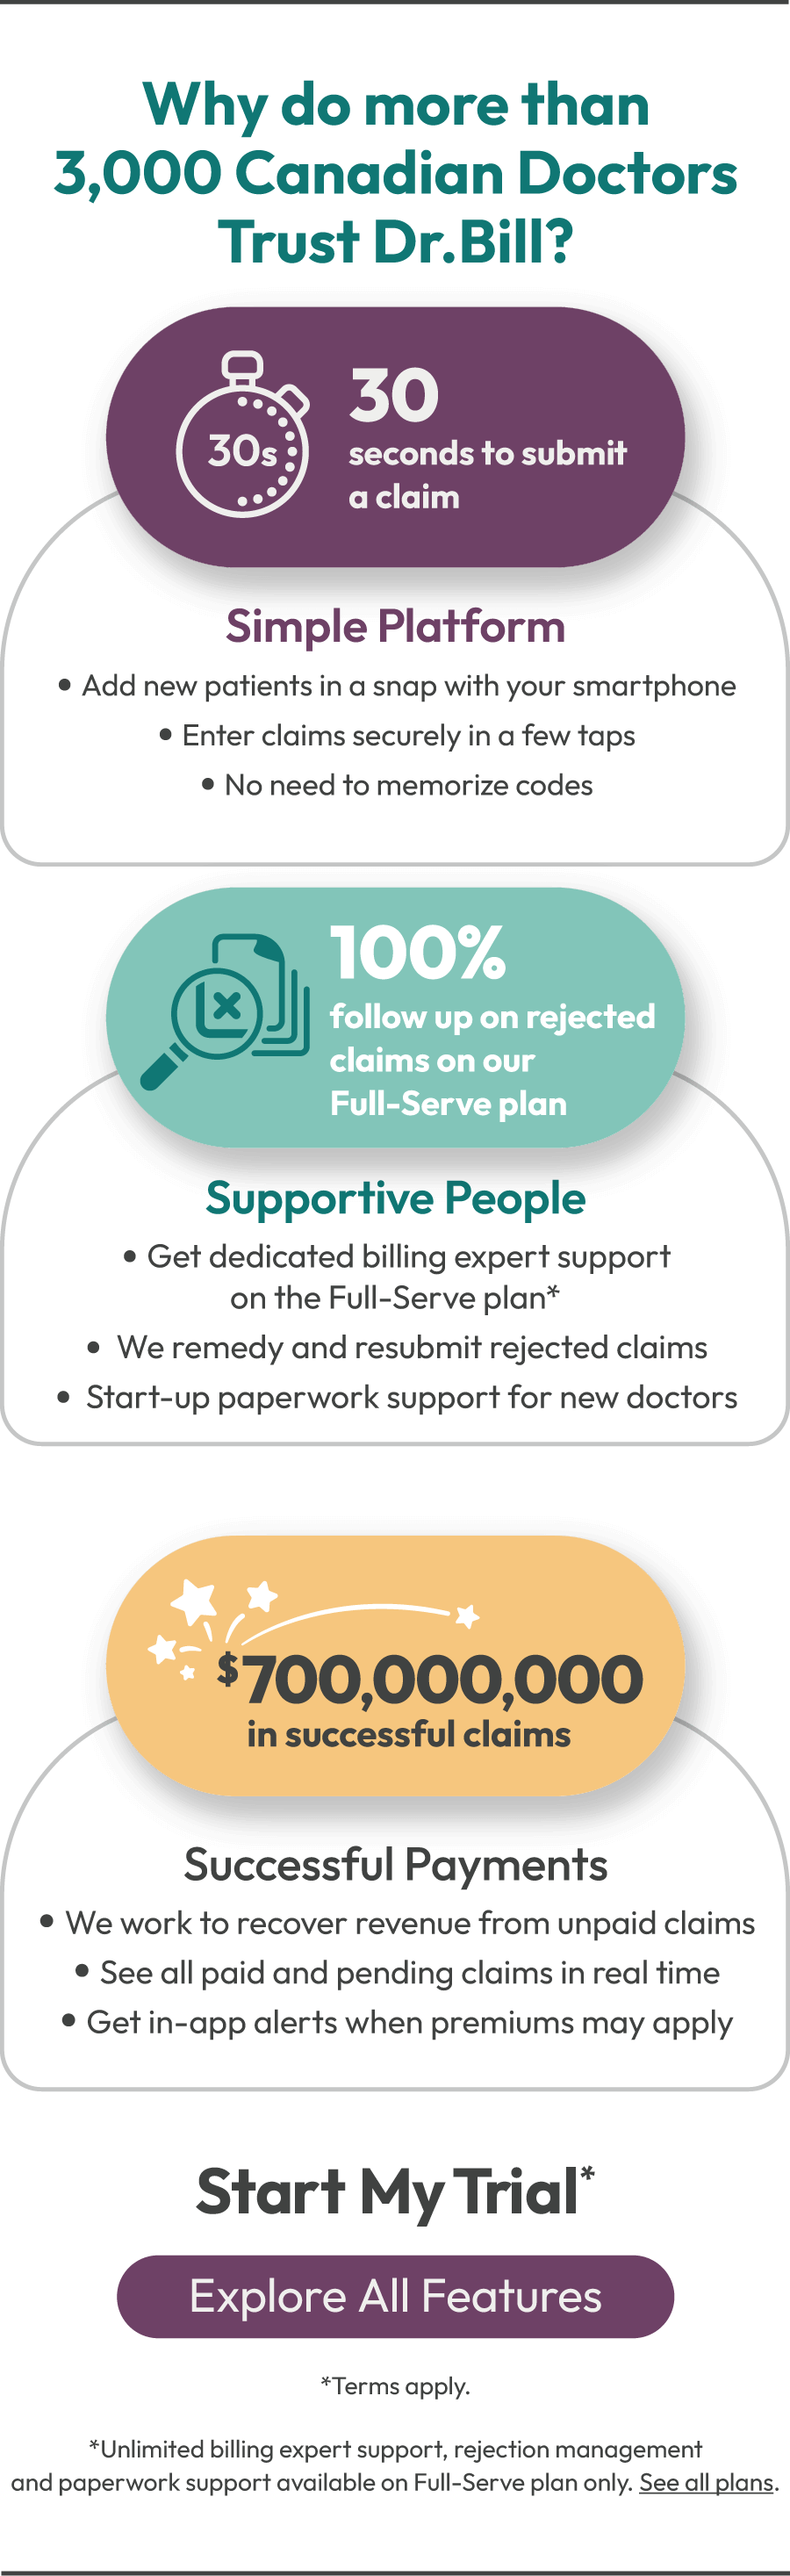 Dr. Bill Infographic | 3,000 Happy Doctors use our Medical Billing Software-Mobile